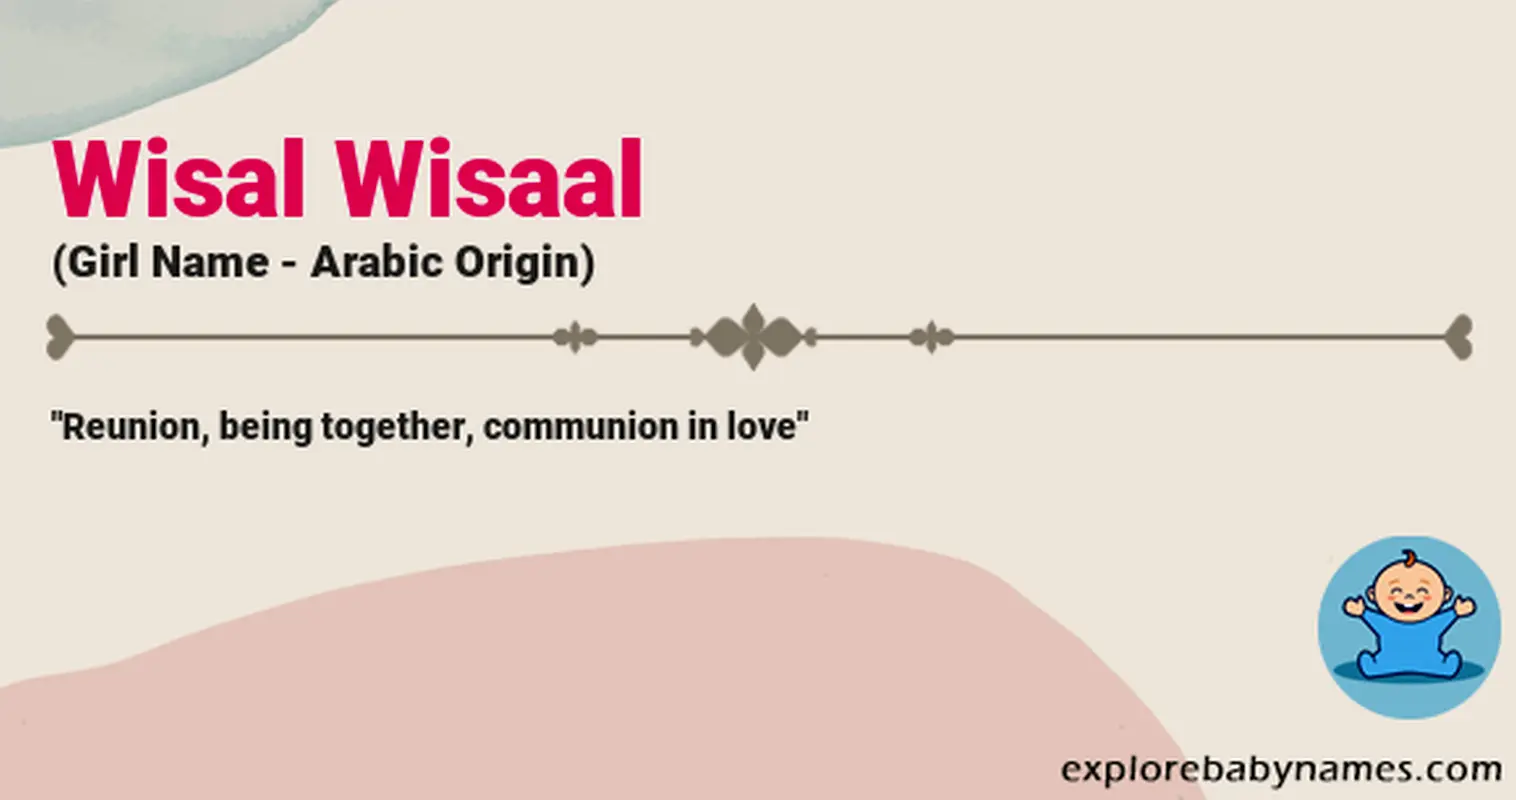 Meaning of Wisal Wisaal